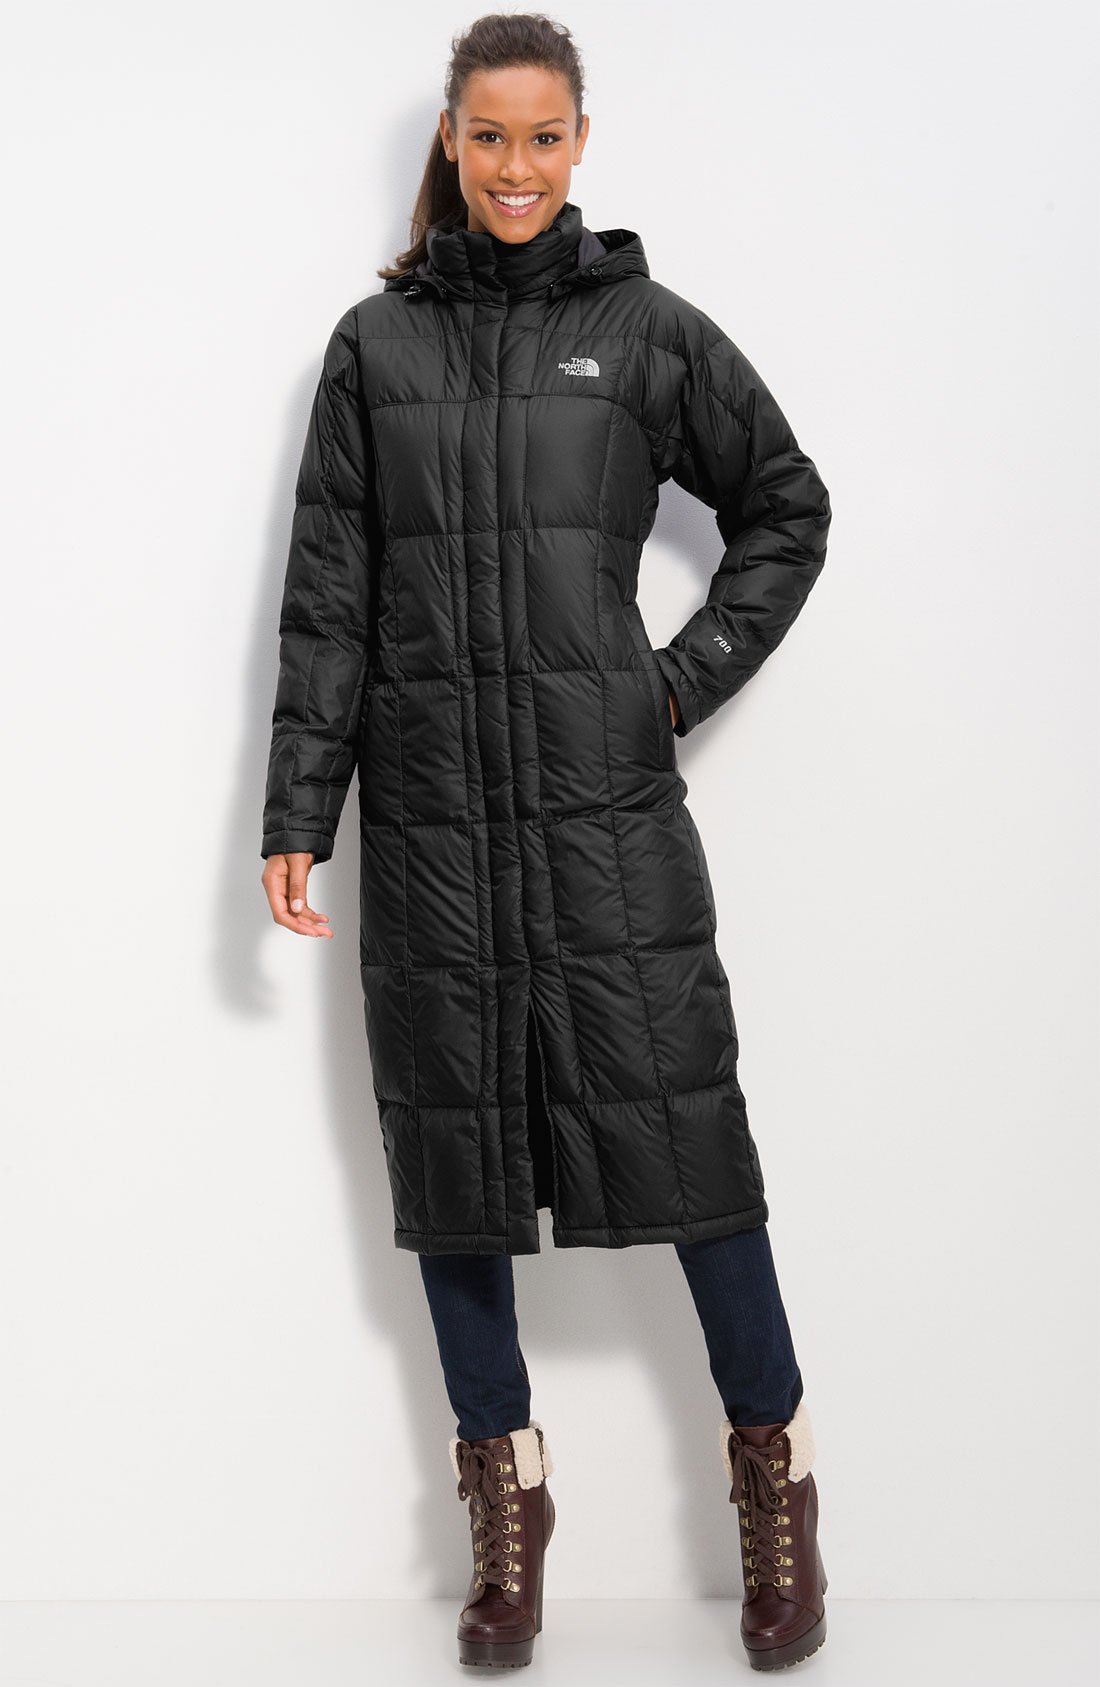 North face jackets long - Best stores teenage girl, outfits 2020